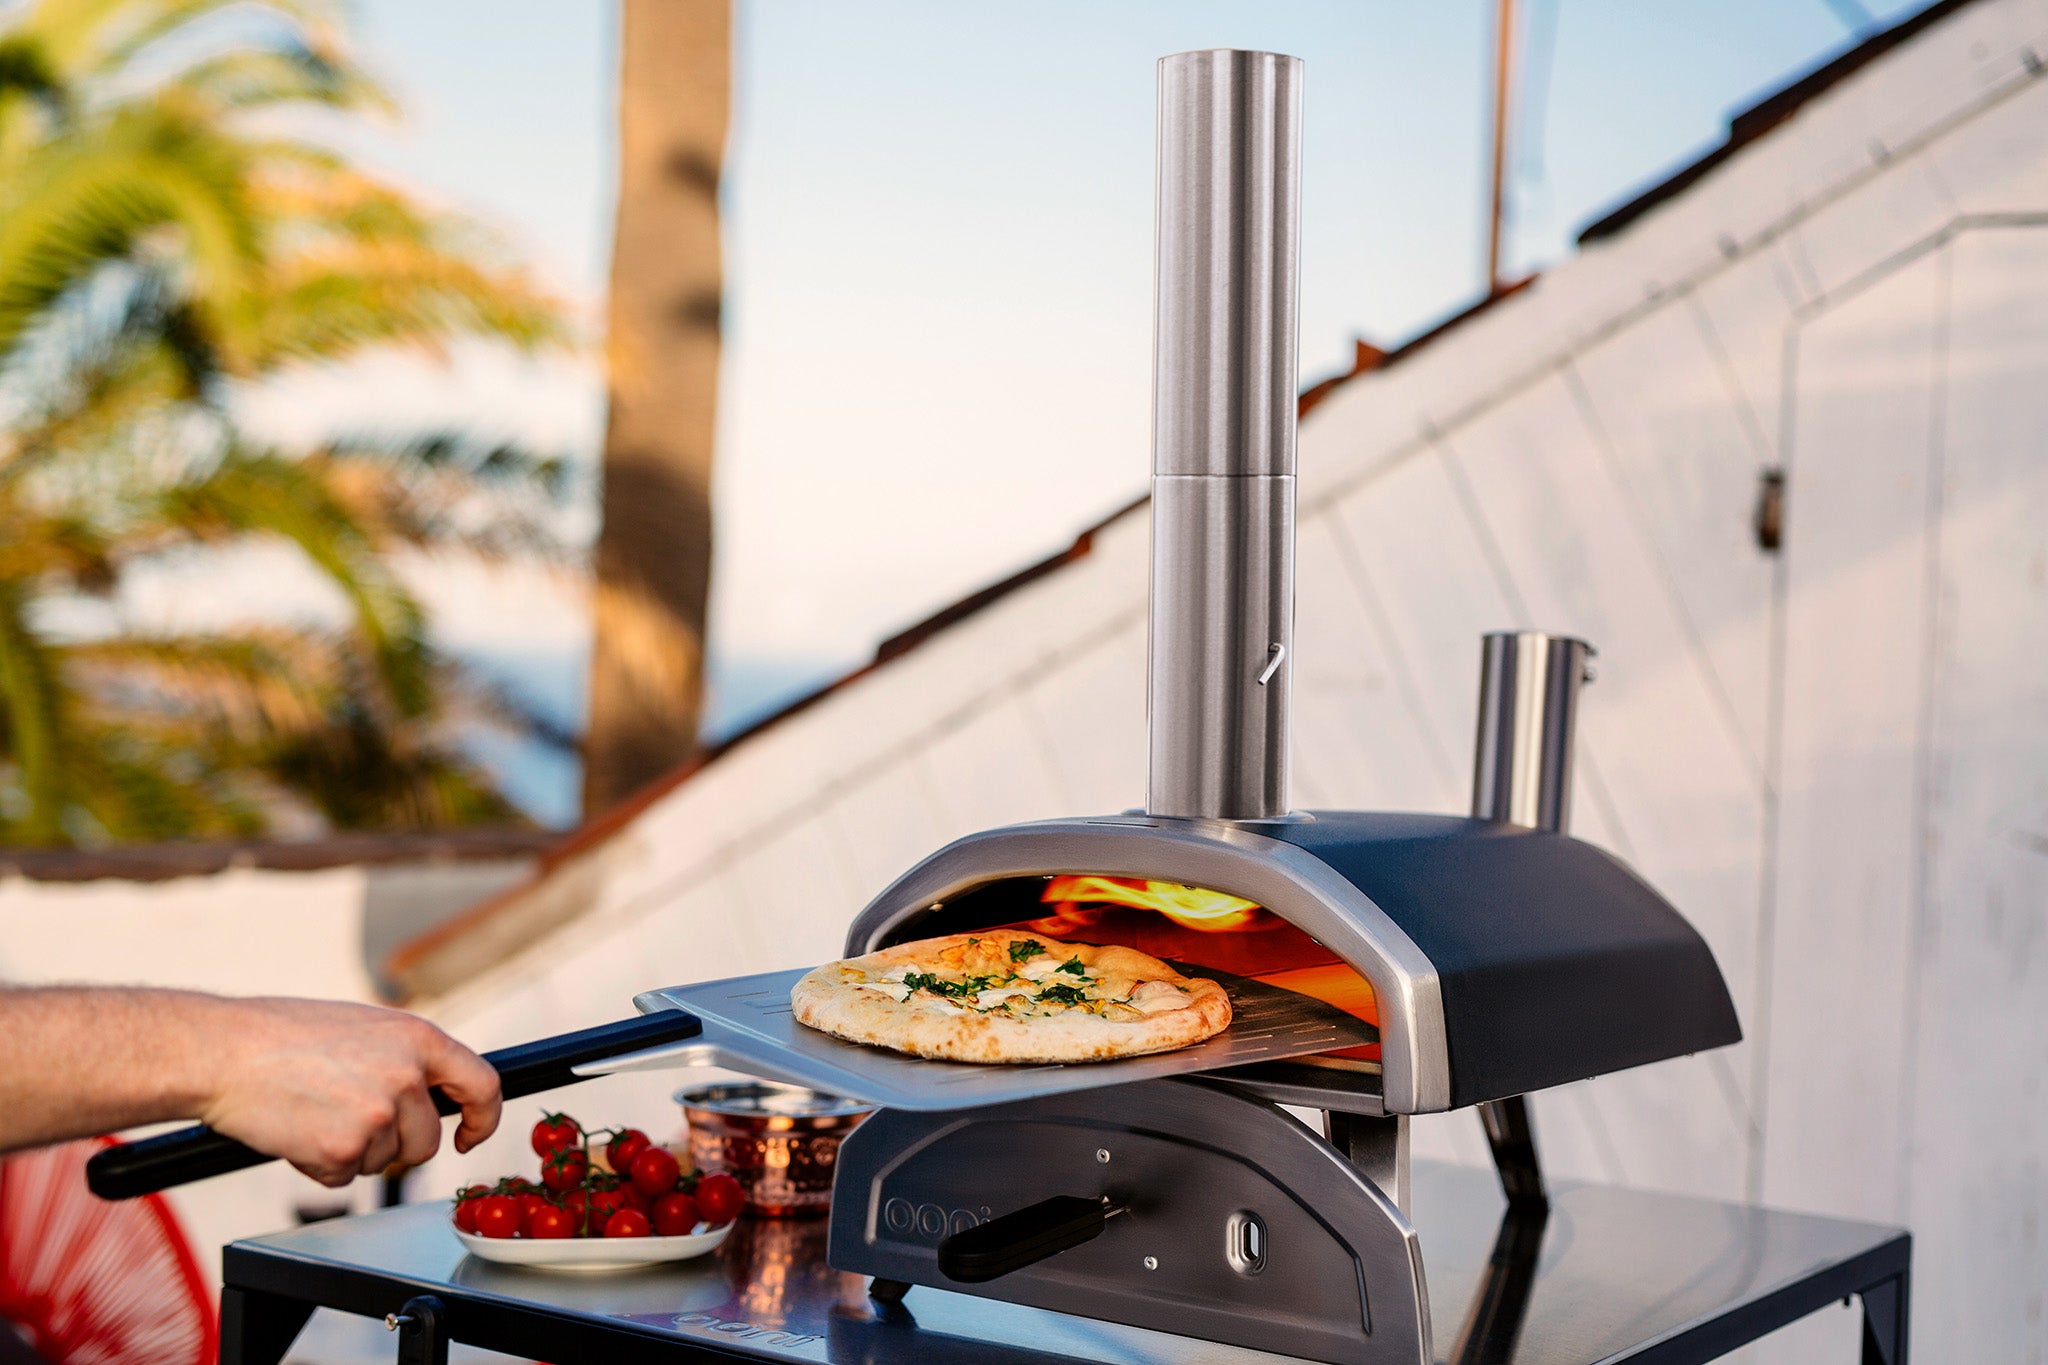 https://recipes.net/wp-content/uploads/2023/09/how-to-make-great-pizza-in-an-outdoor-pizza-oven-1694866849.jpg